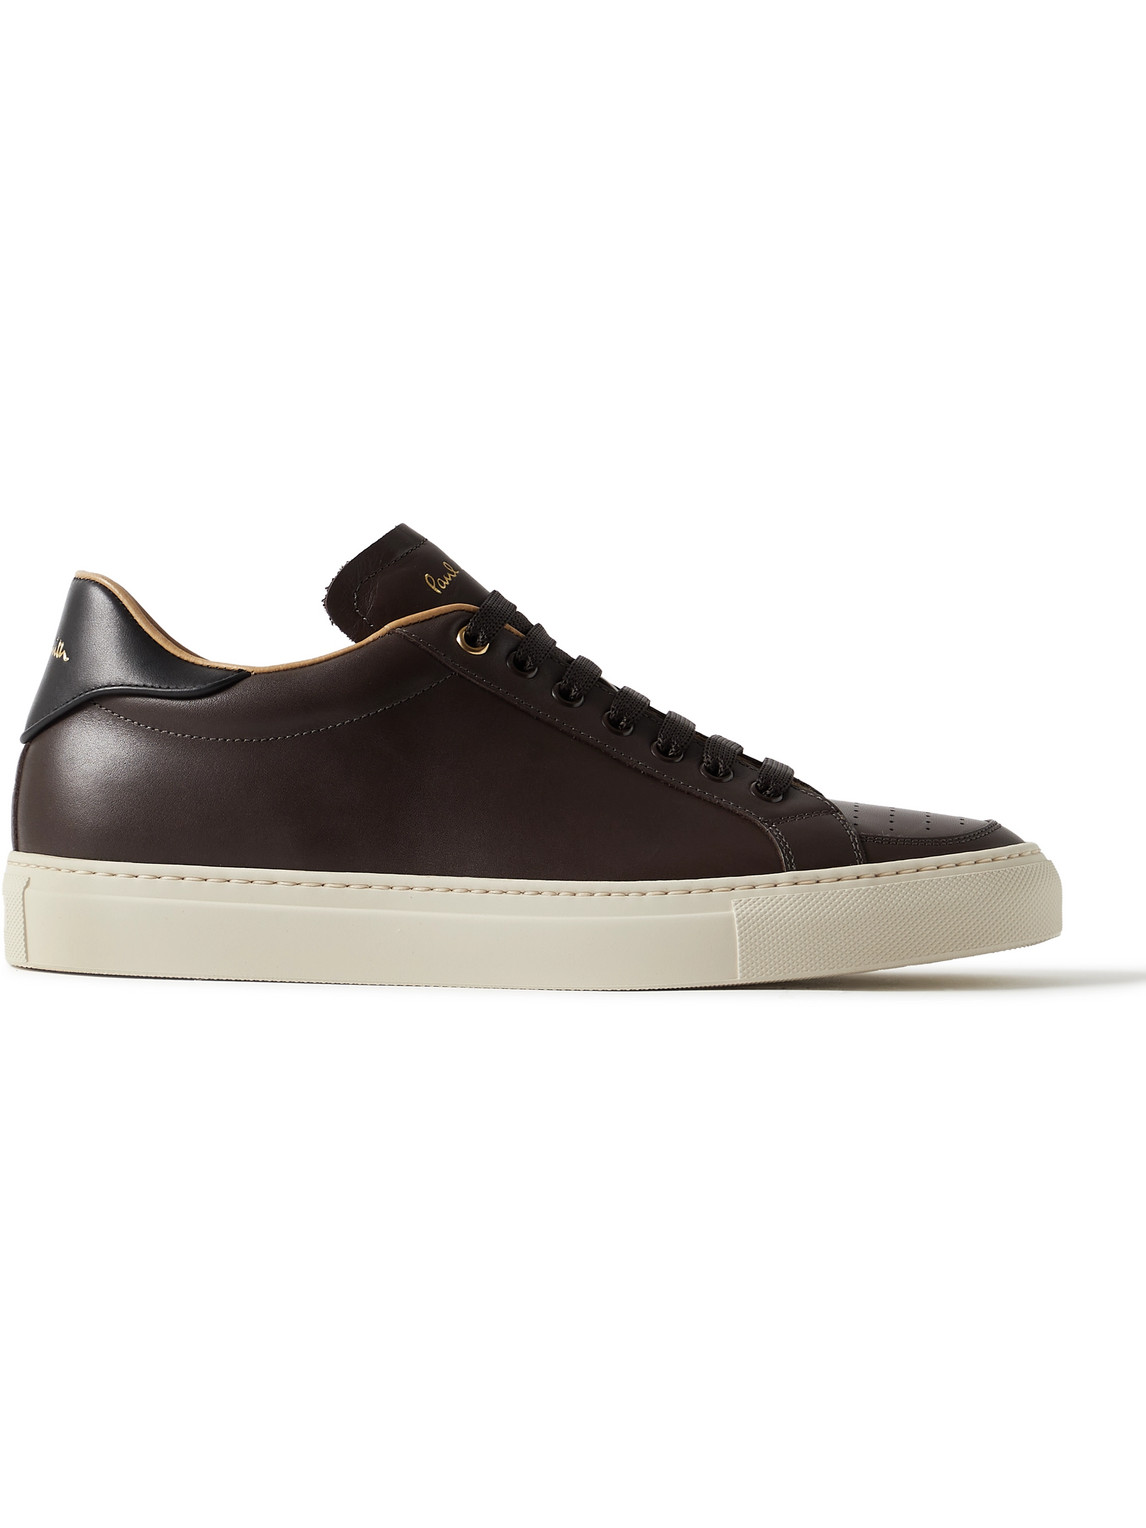 Paul Smith Banff Leather Sneakers In Brown